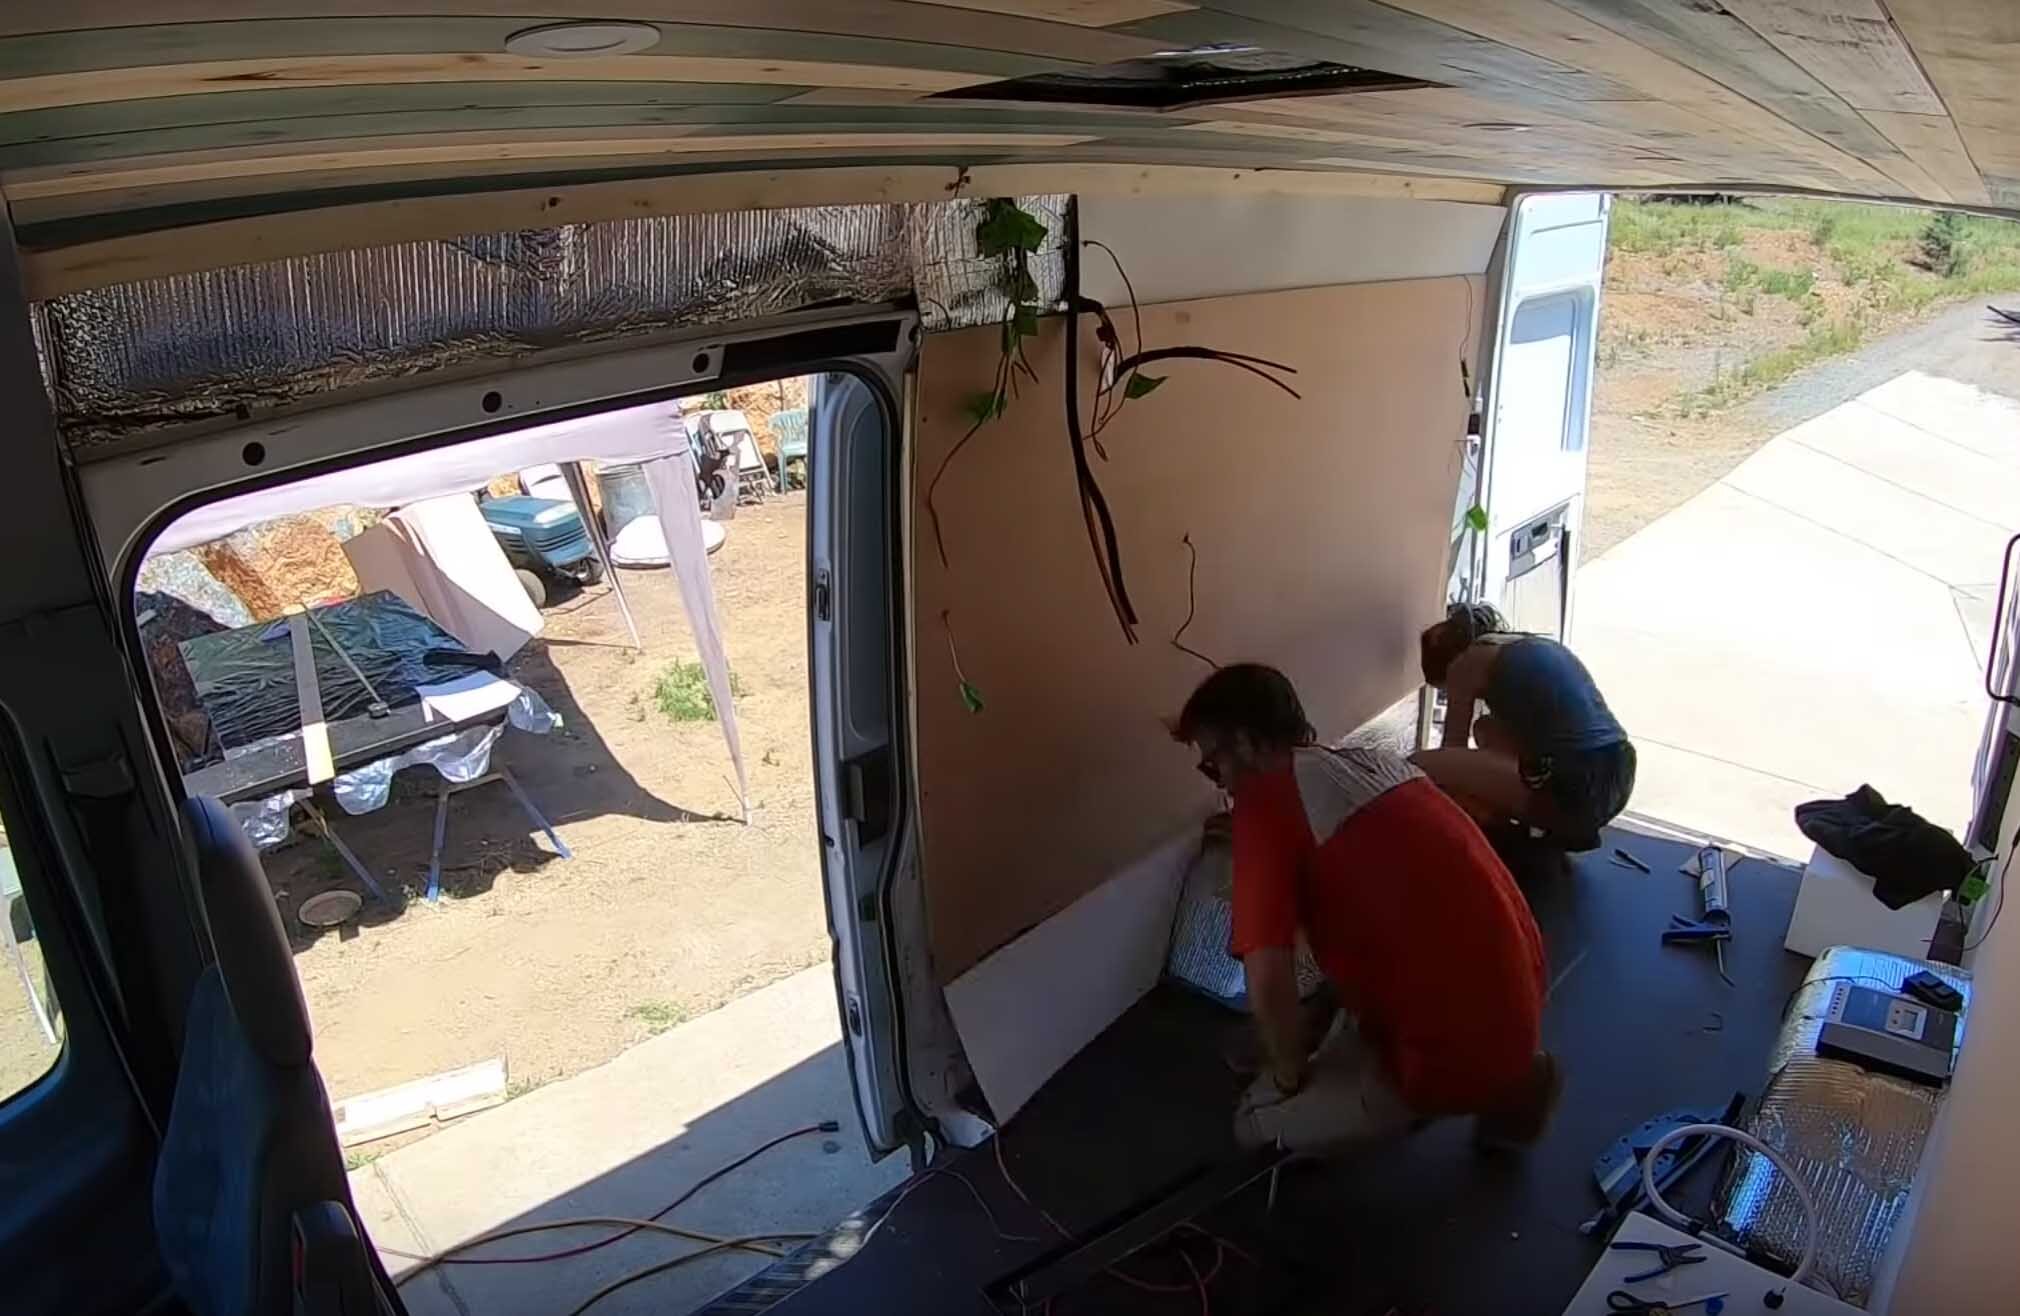 Attaching walls to a van